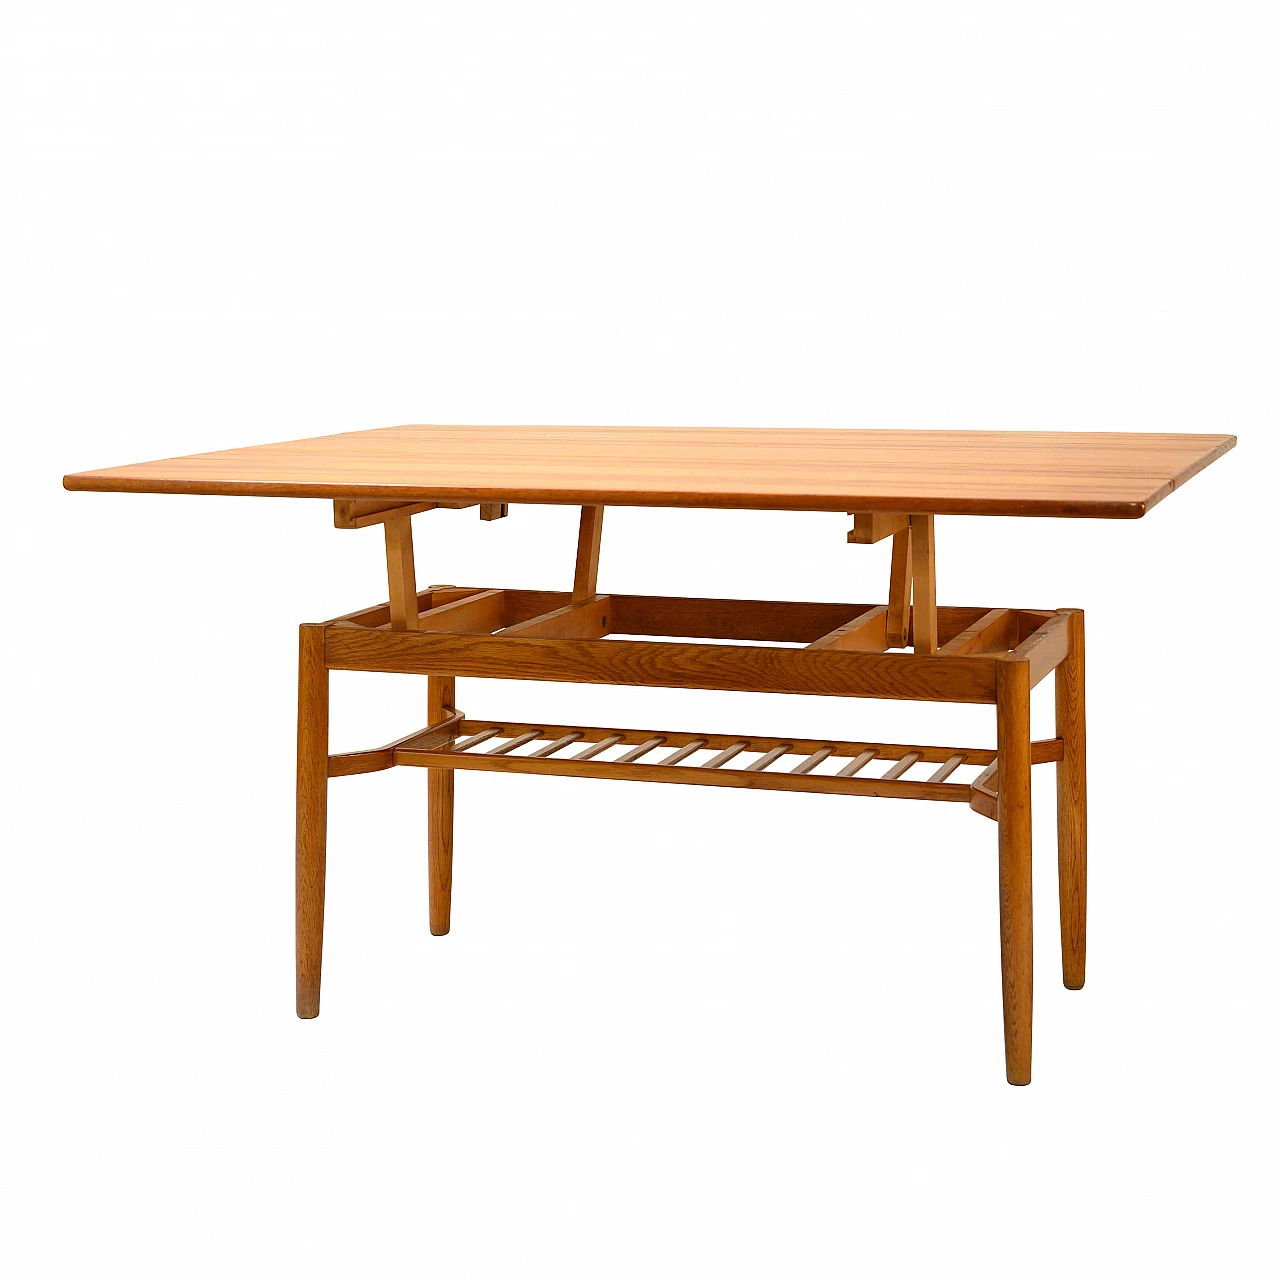 Swedish coffee table convertible into dining table by Tingström, 1950s 1120044